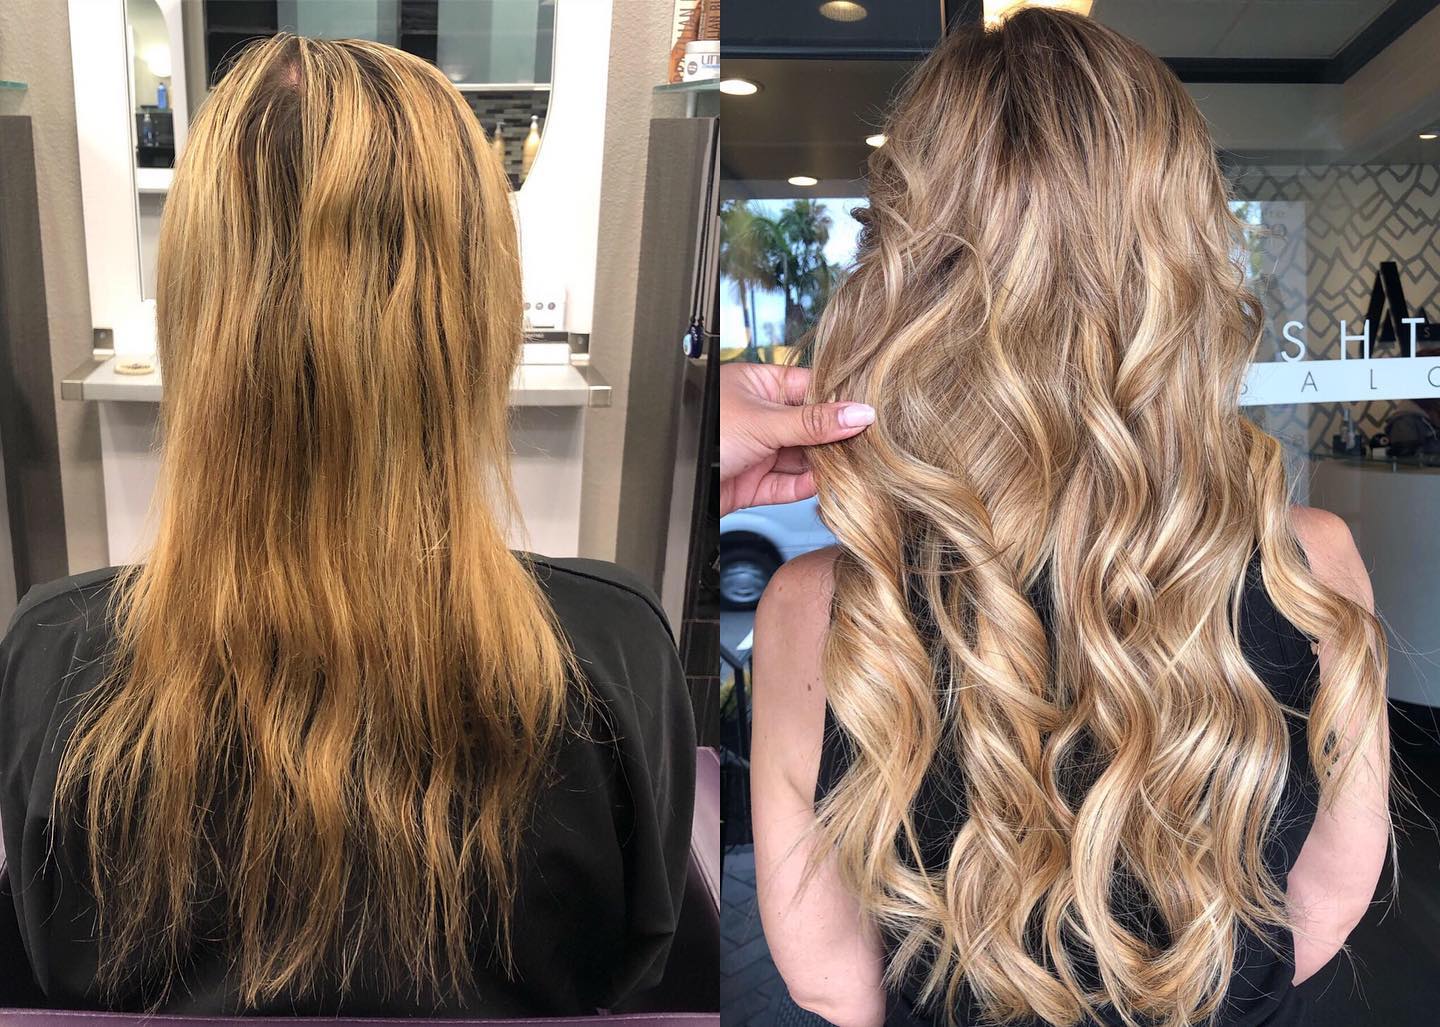 Hairstyles by Rosy - Newport Beach